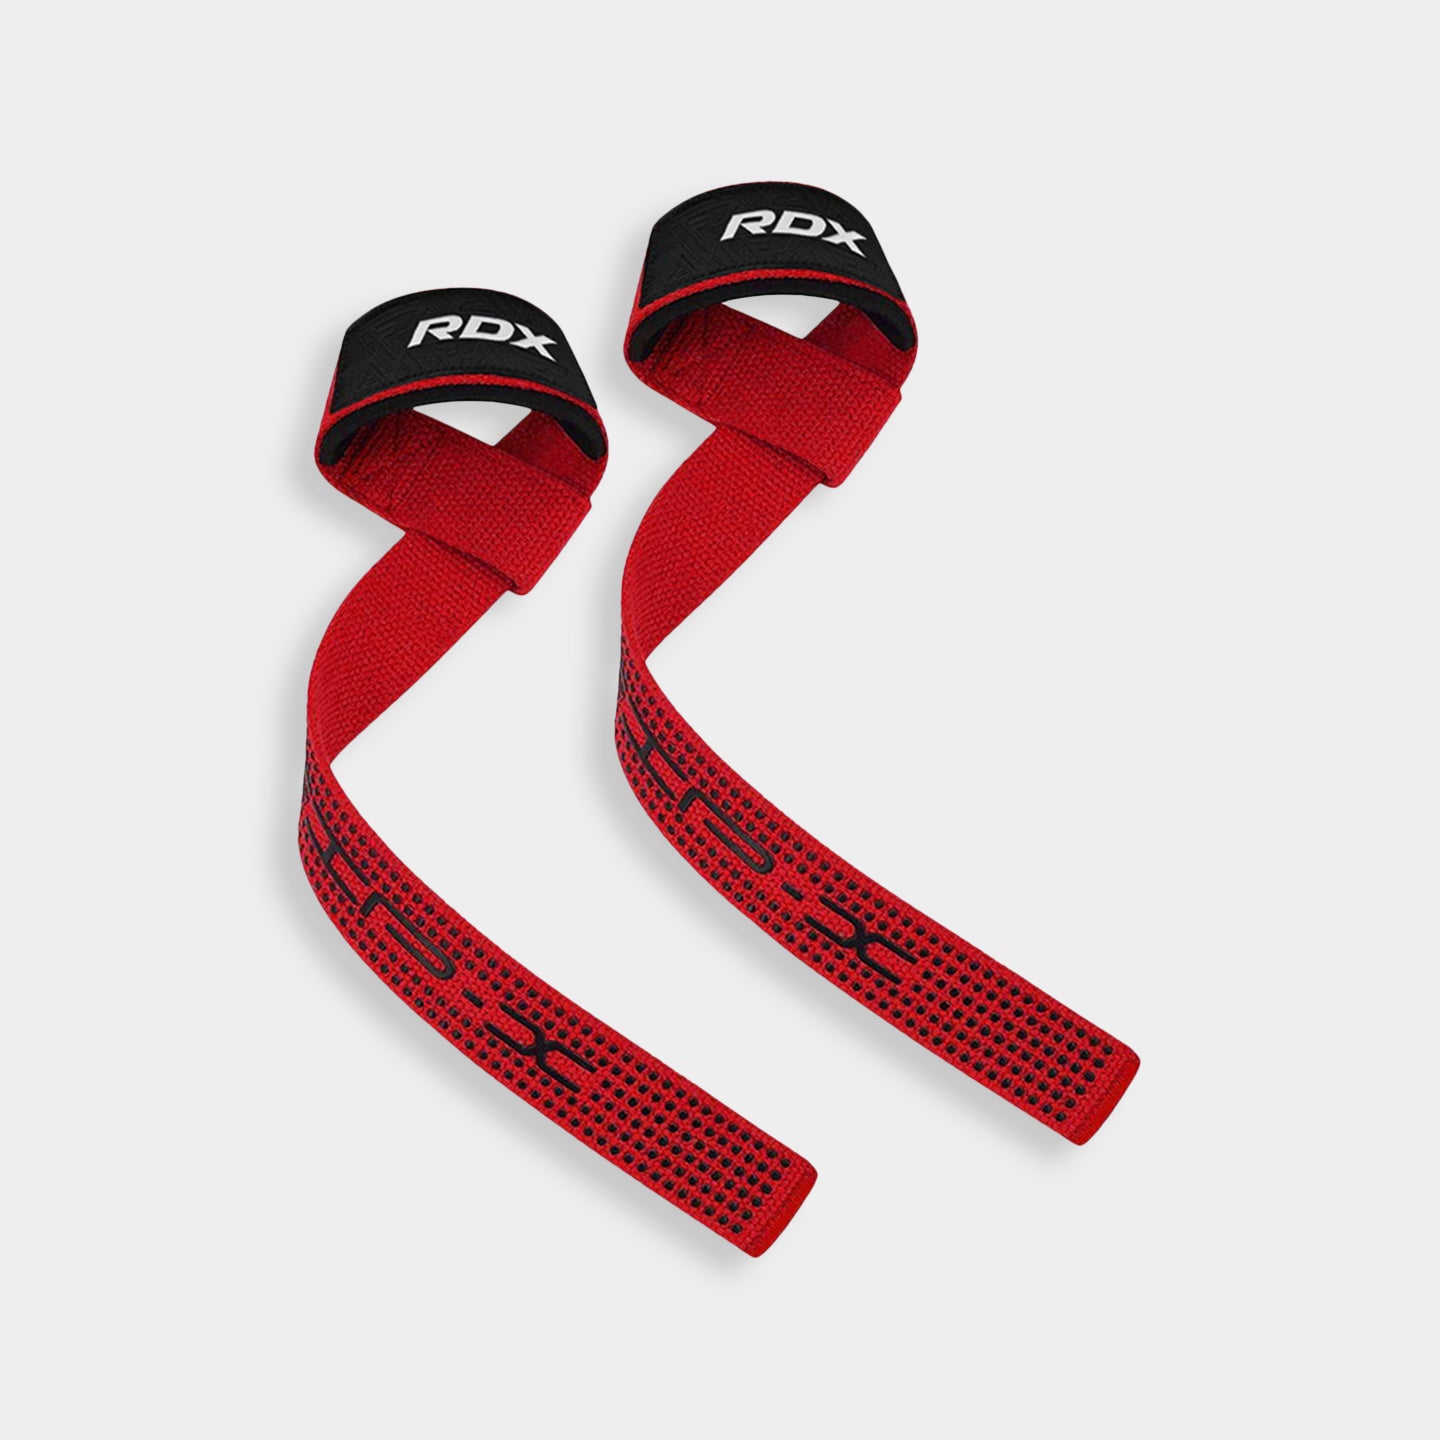 RDX Sports S4 Weightlifting Wrist Straps Weightlifting And Strength Training, Standard Size, Red A1